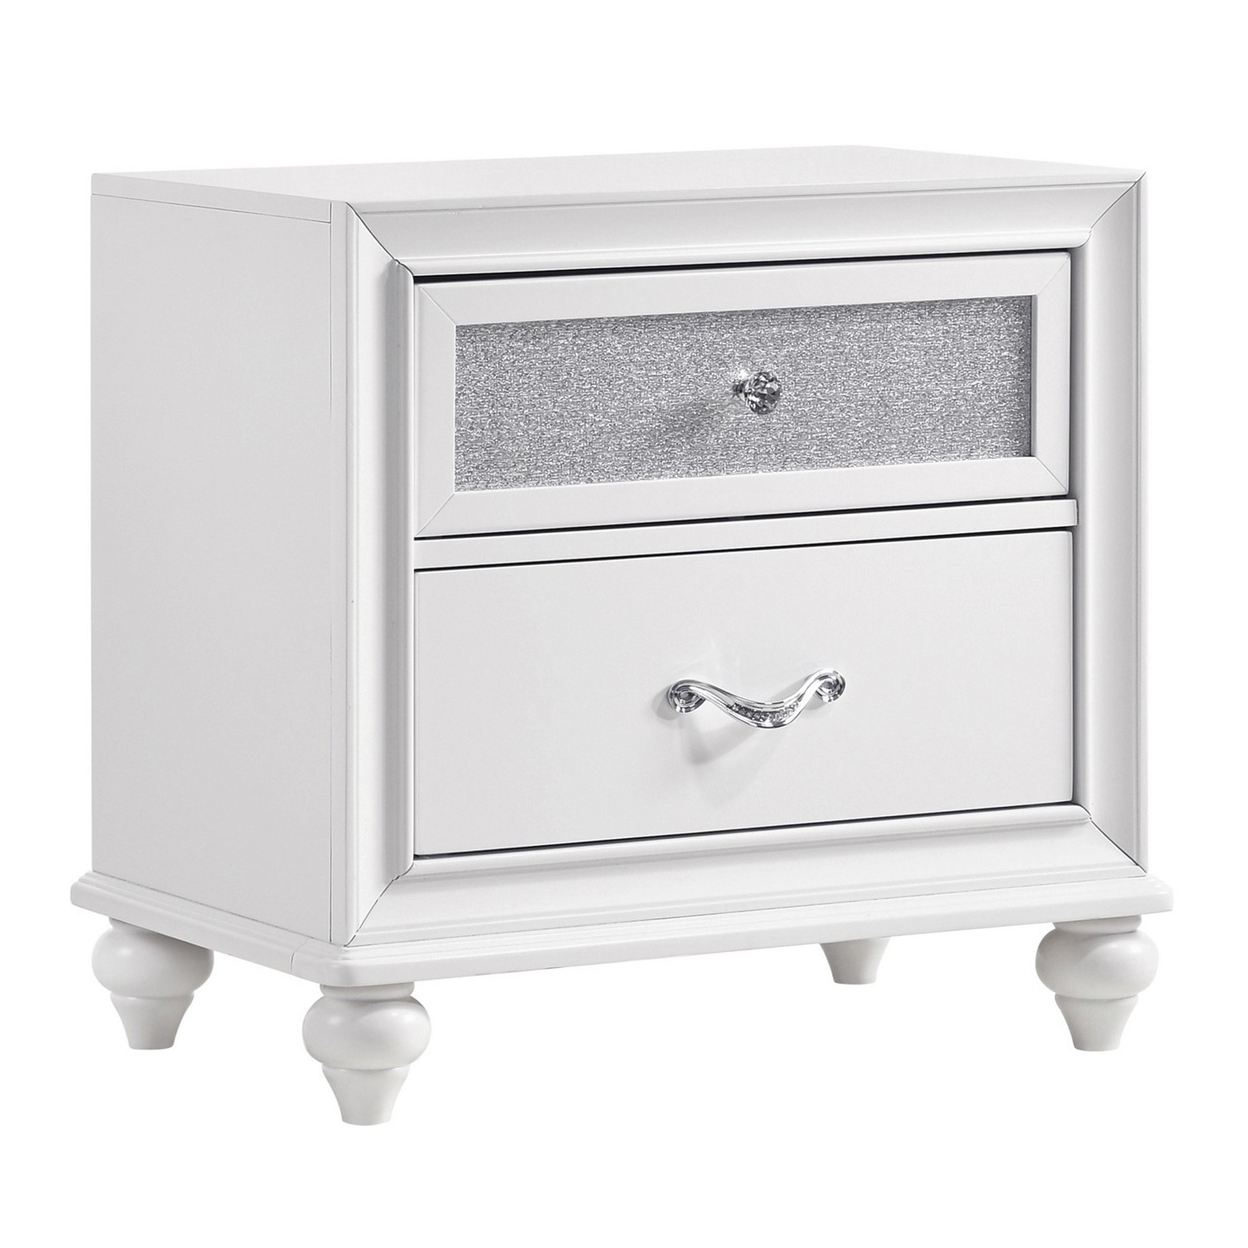 Nightstand With 2 Drawers And Glittery Acrylic Front, White- Saltoro Sherpi